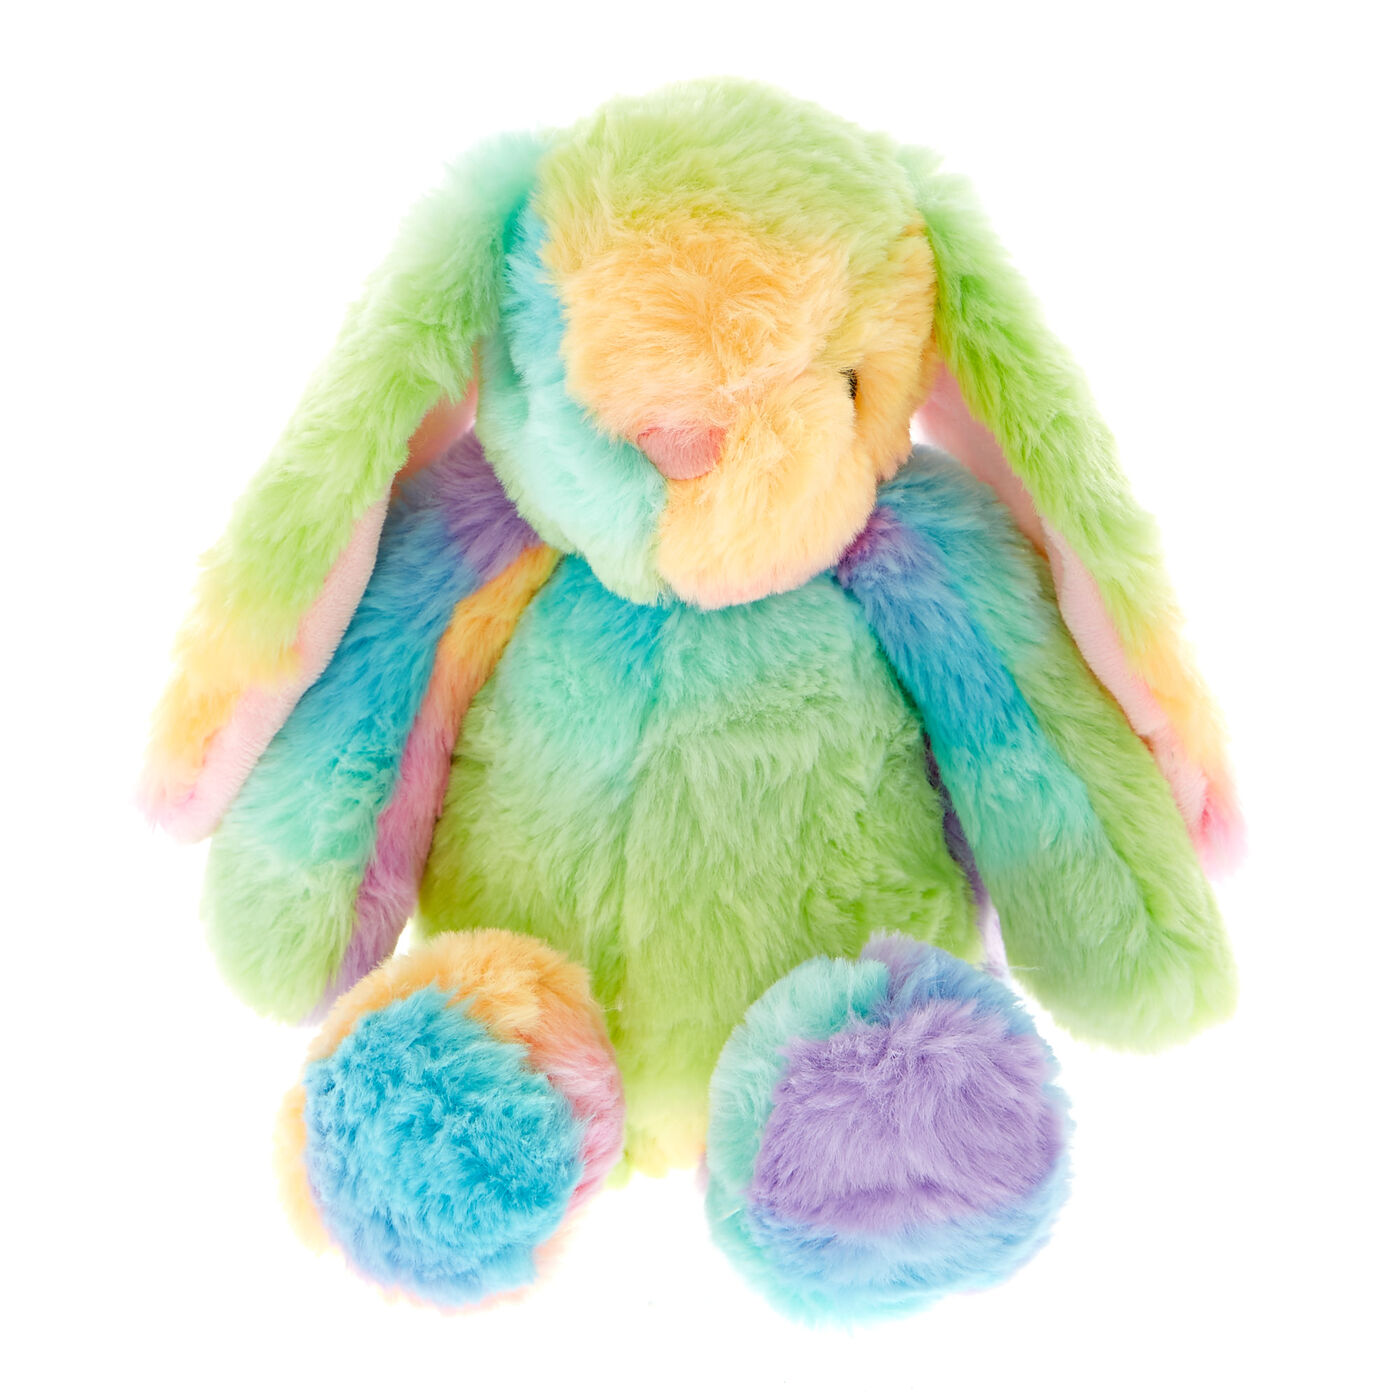 Buy Pastel Rainbow Bunny Soft Toy for GBP 3.99 | Card Factory UK